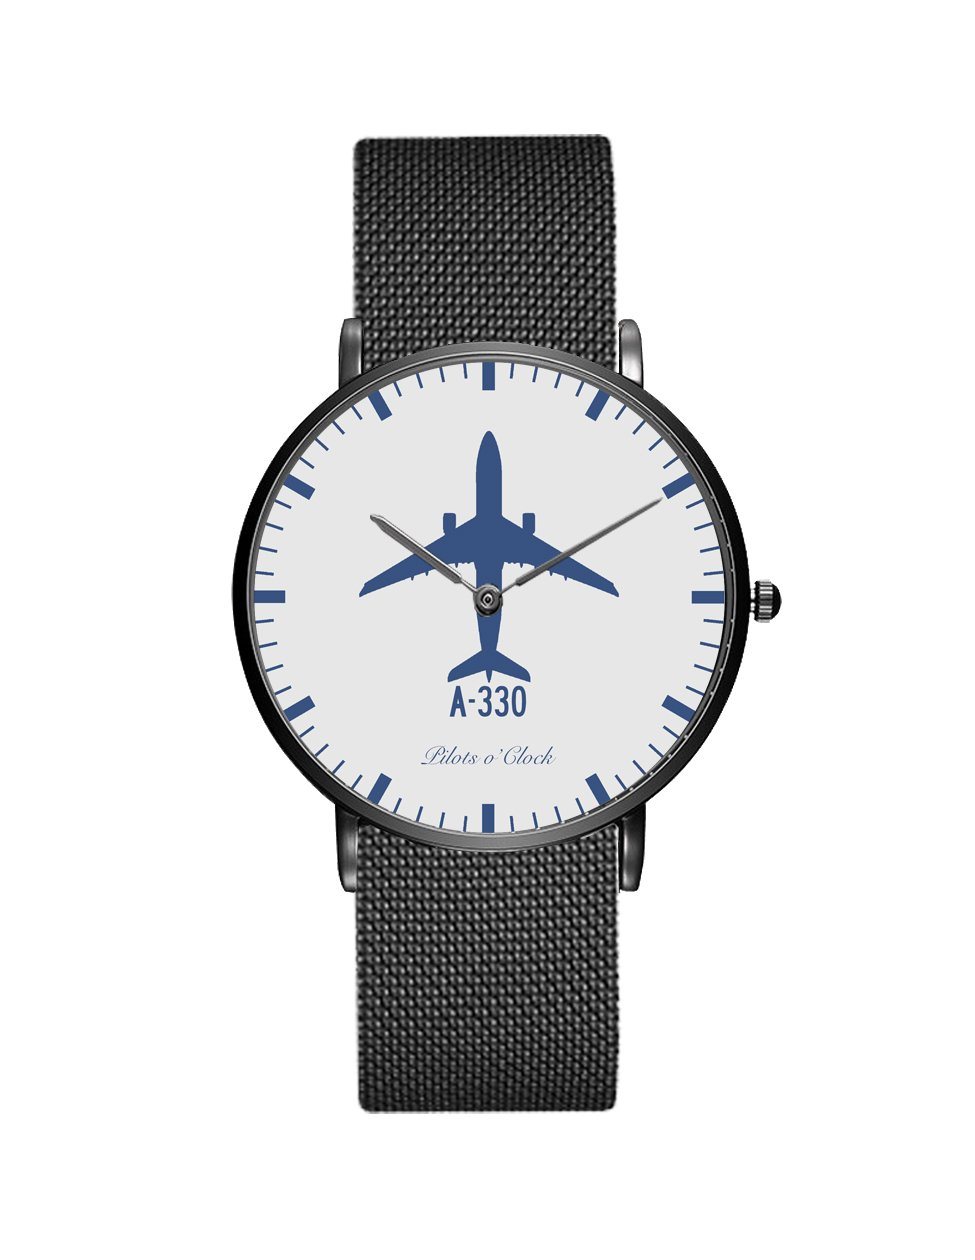 Airbus A330 Stainless Steel Strap Watches Pilot Eyes Store Black & Stainless Steel Strap 